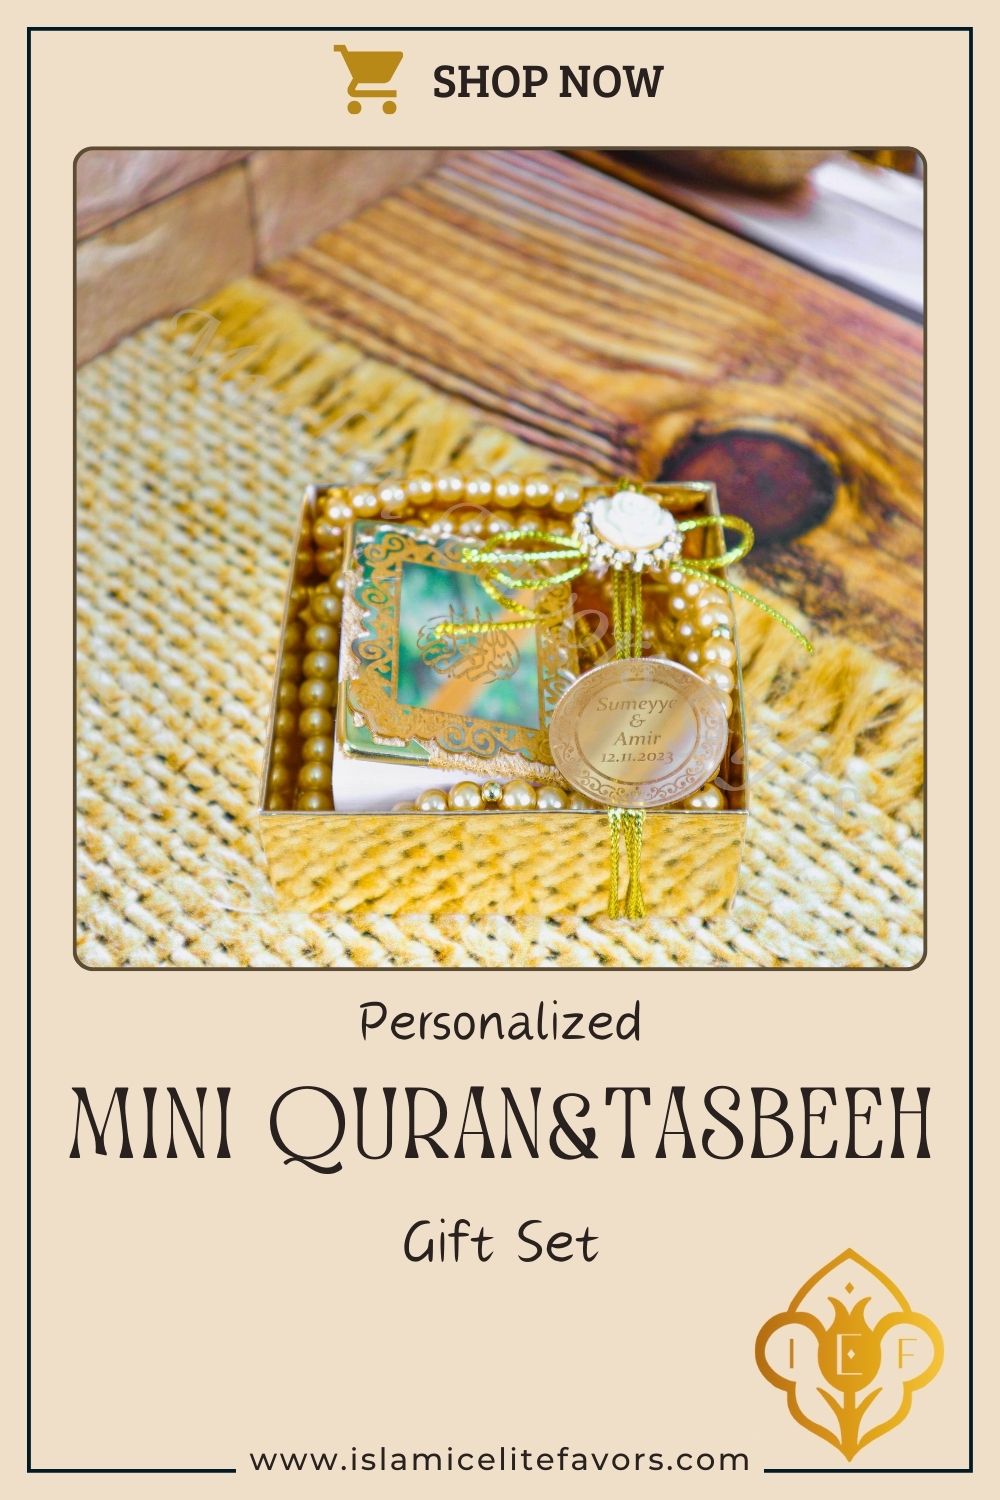 Personalized Wedding Favor Mini Quran Pearl Tasbeeh Basmala Theme - Islamic Elite Favors is a handmade gift shop offering a wide variety of unique and personalized gifts for all occasions. Whether you're looking for the perfect Ramadan, Eid, Hajj, wedding gift or something special for a birthday, baby shower or anniversary, we have something for everyone. High quality, made with love.